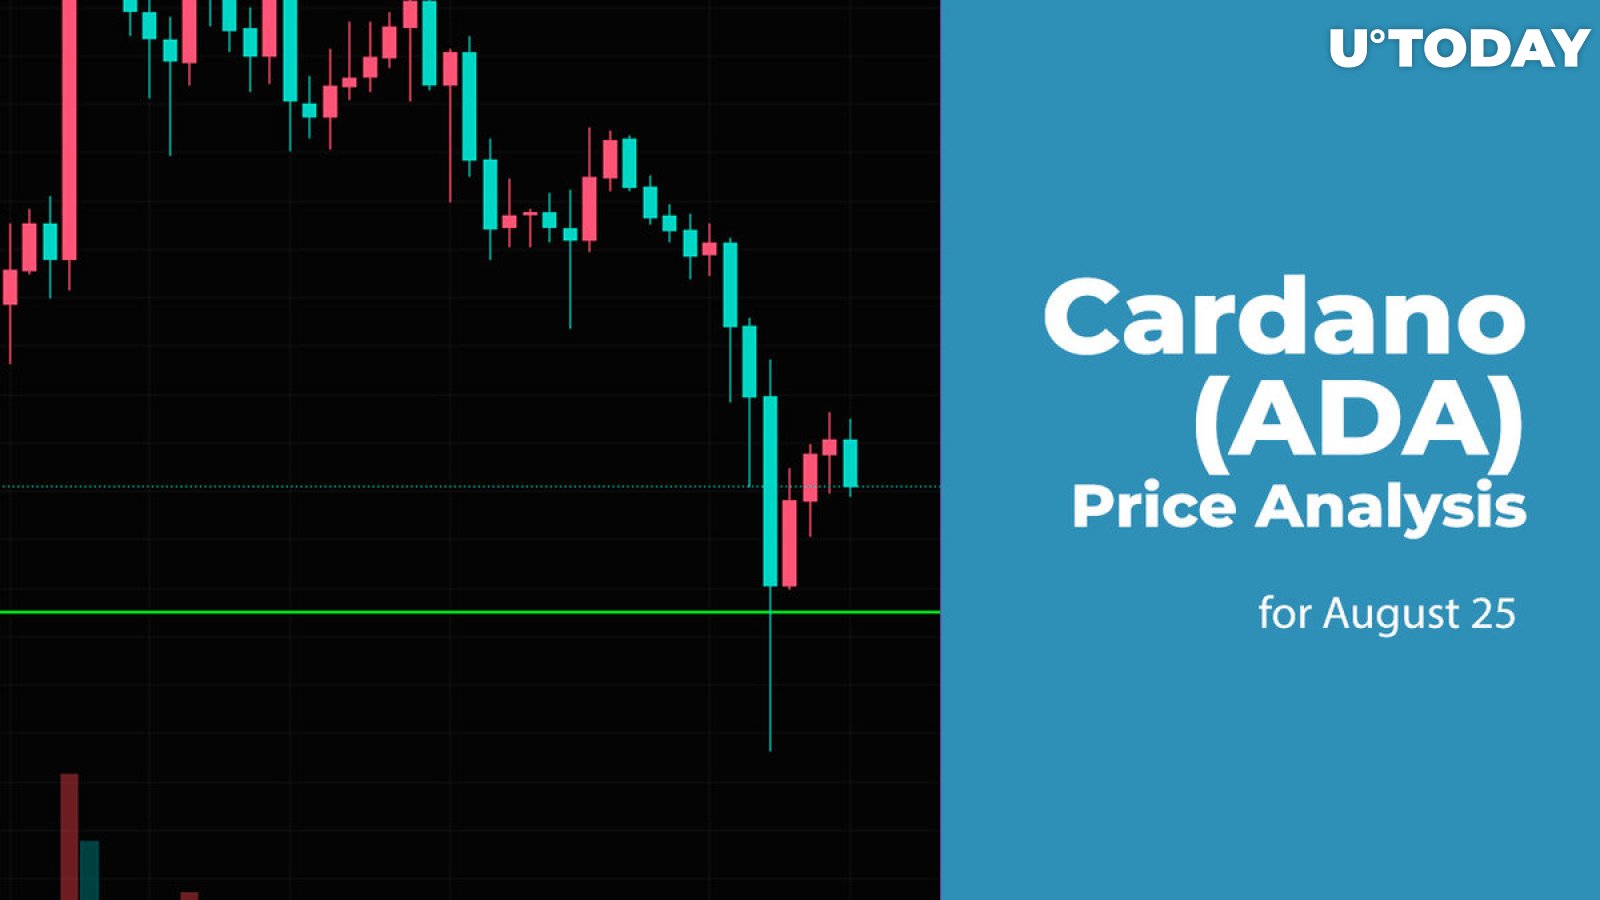 Cardano (ADA) Price Analysis for August 25